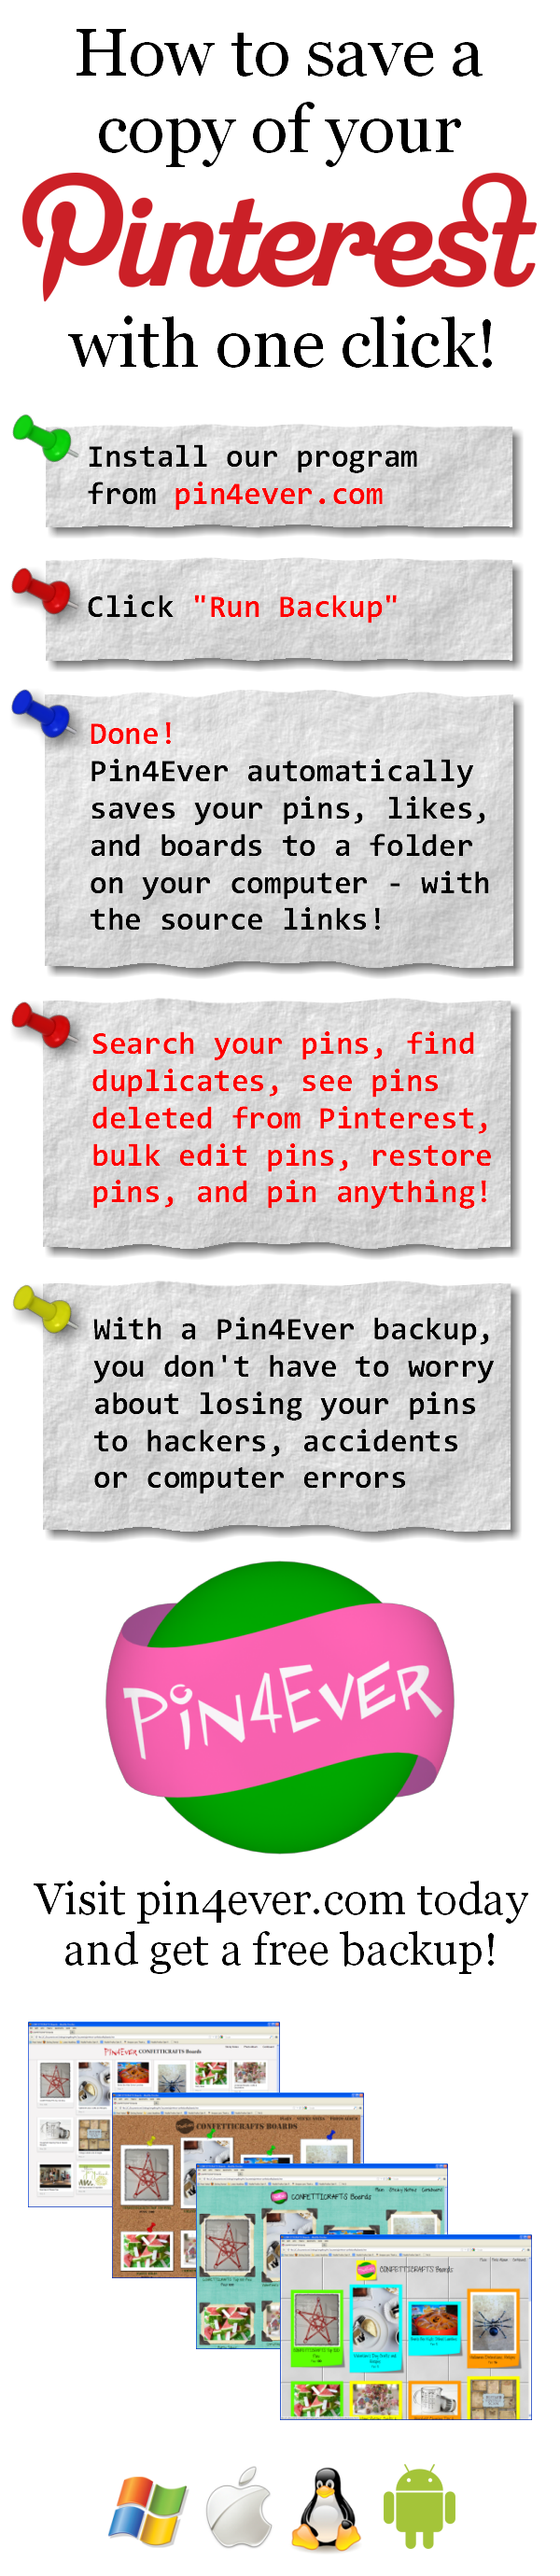 Are your pins protected? Pin4Ever has saved, edited or uploaded 476,662,903 pins since September 2012. Go to pin4ever.com and try it free!